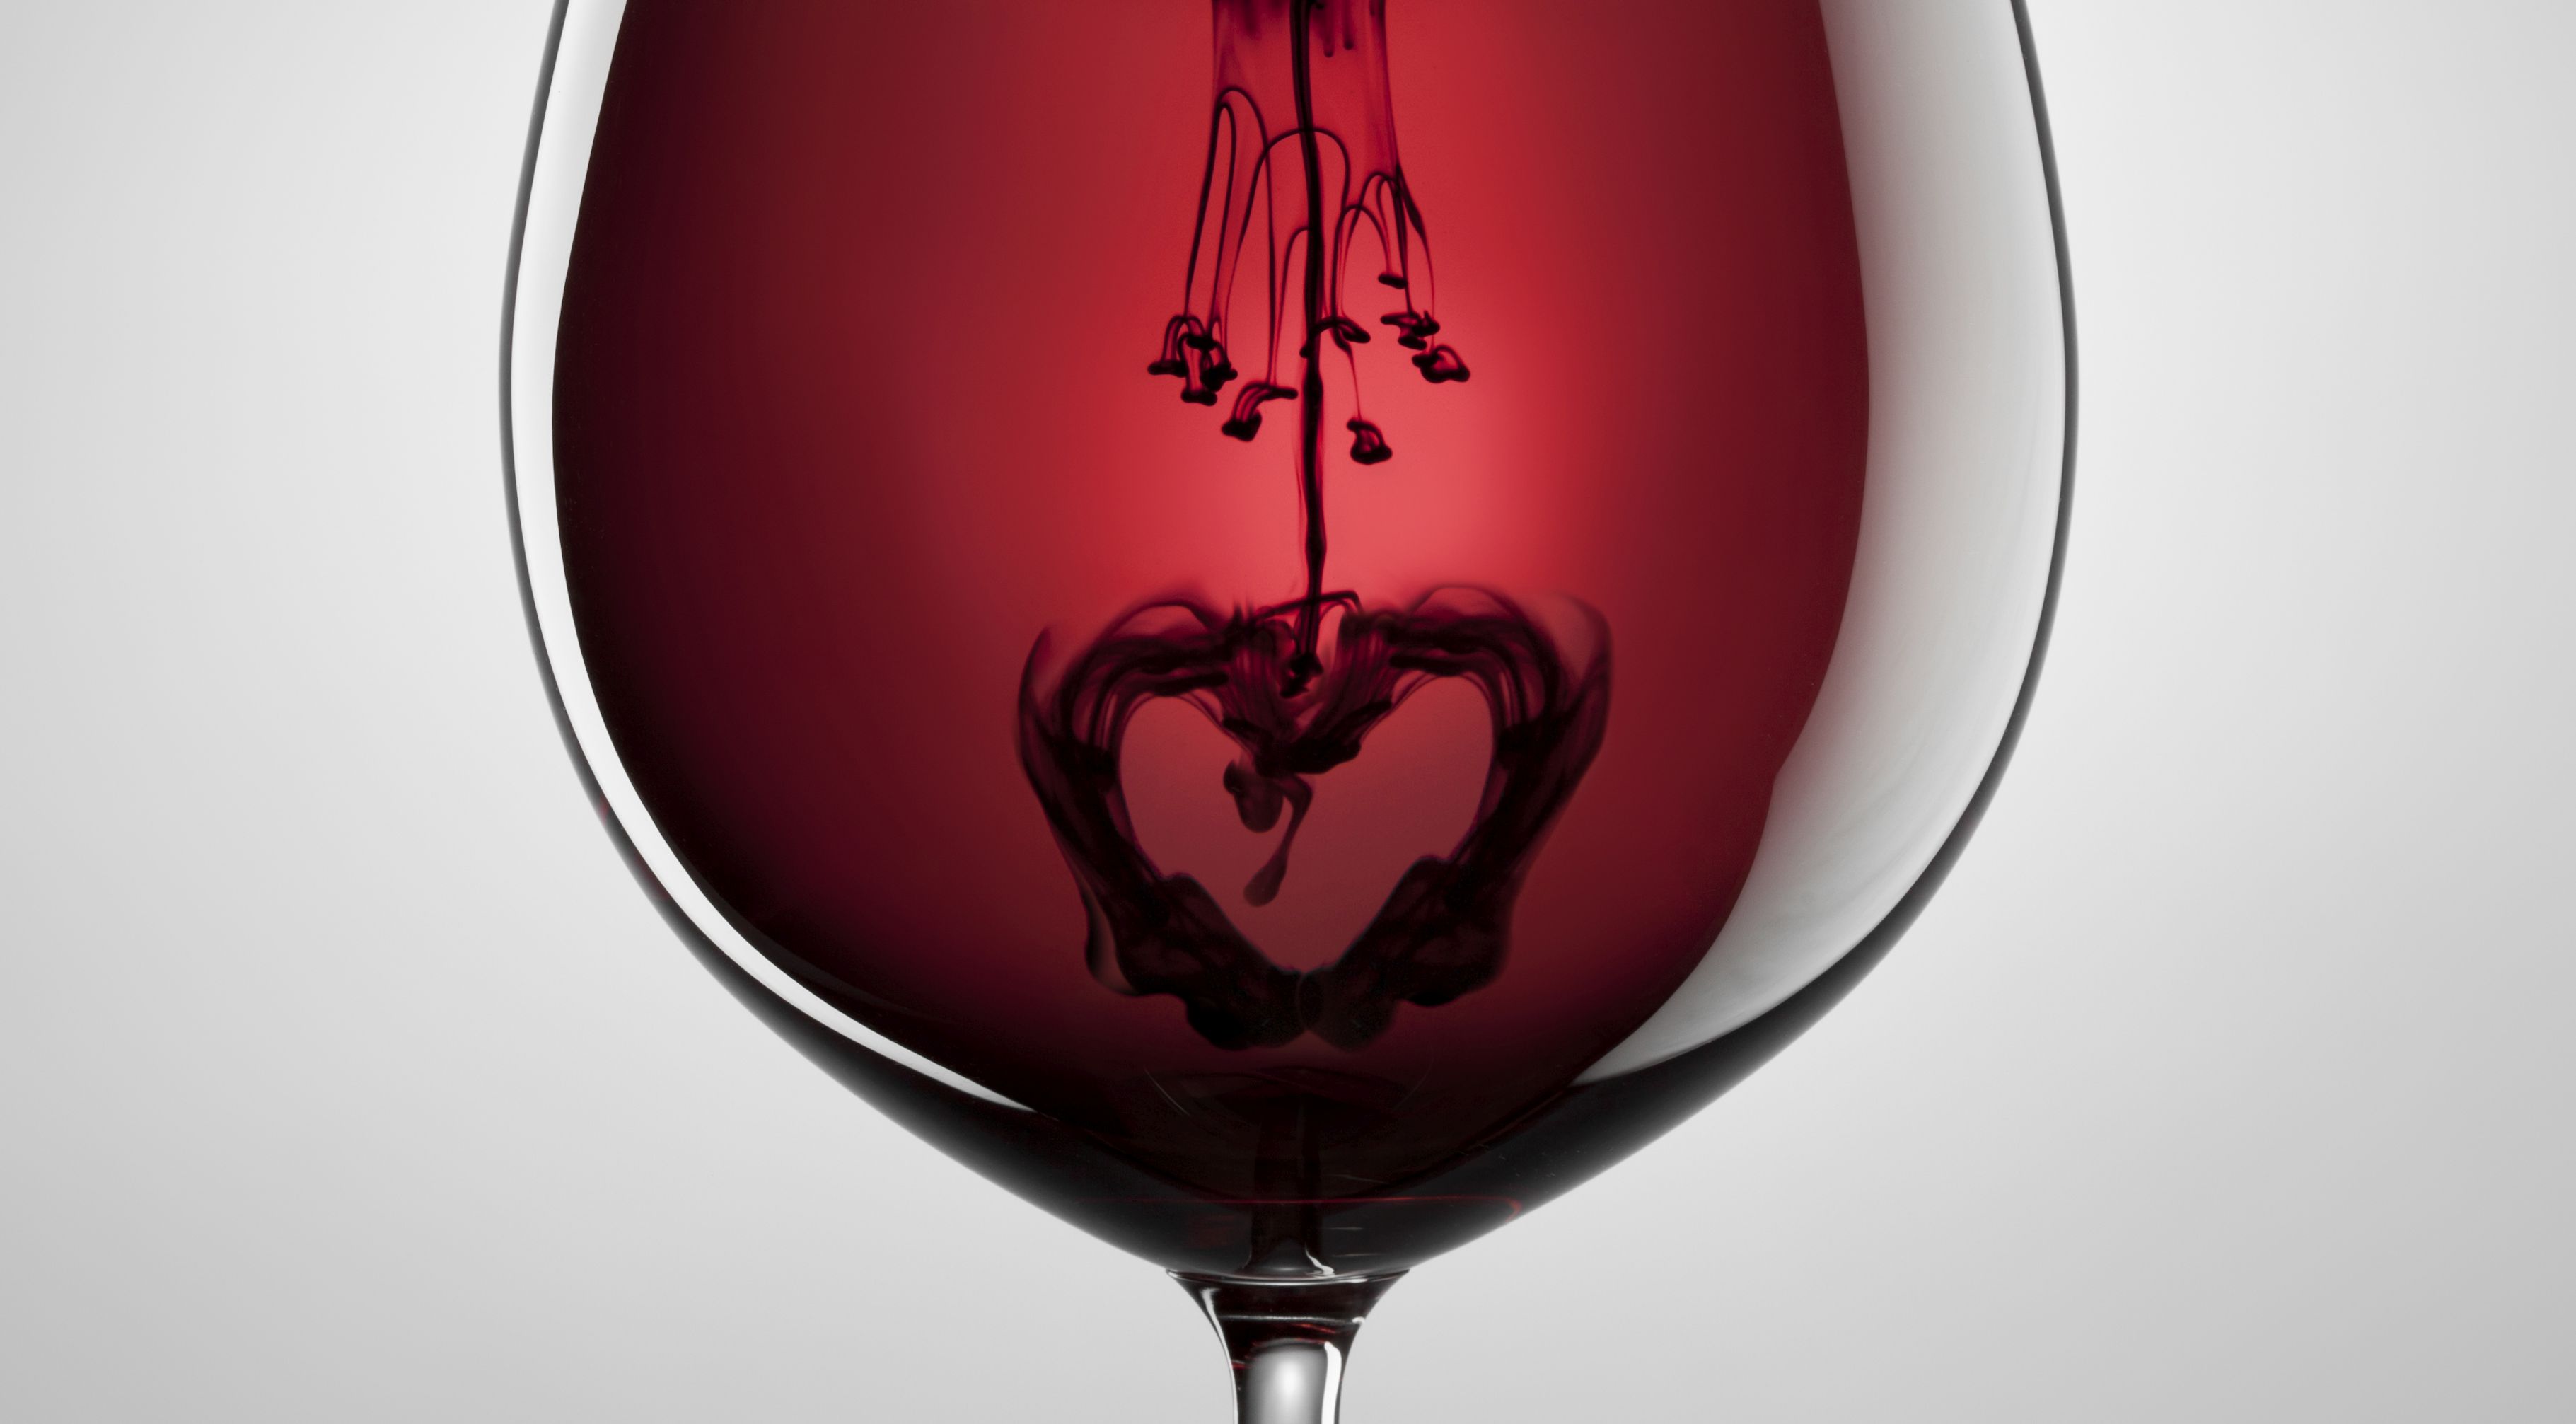 No amount of alcohol is good for the heart, says World Heart Federation